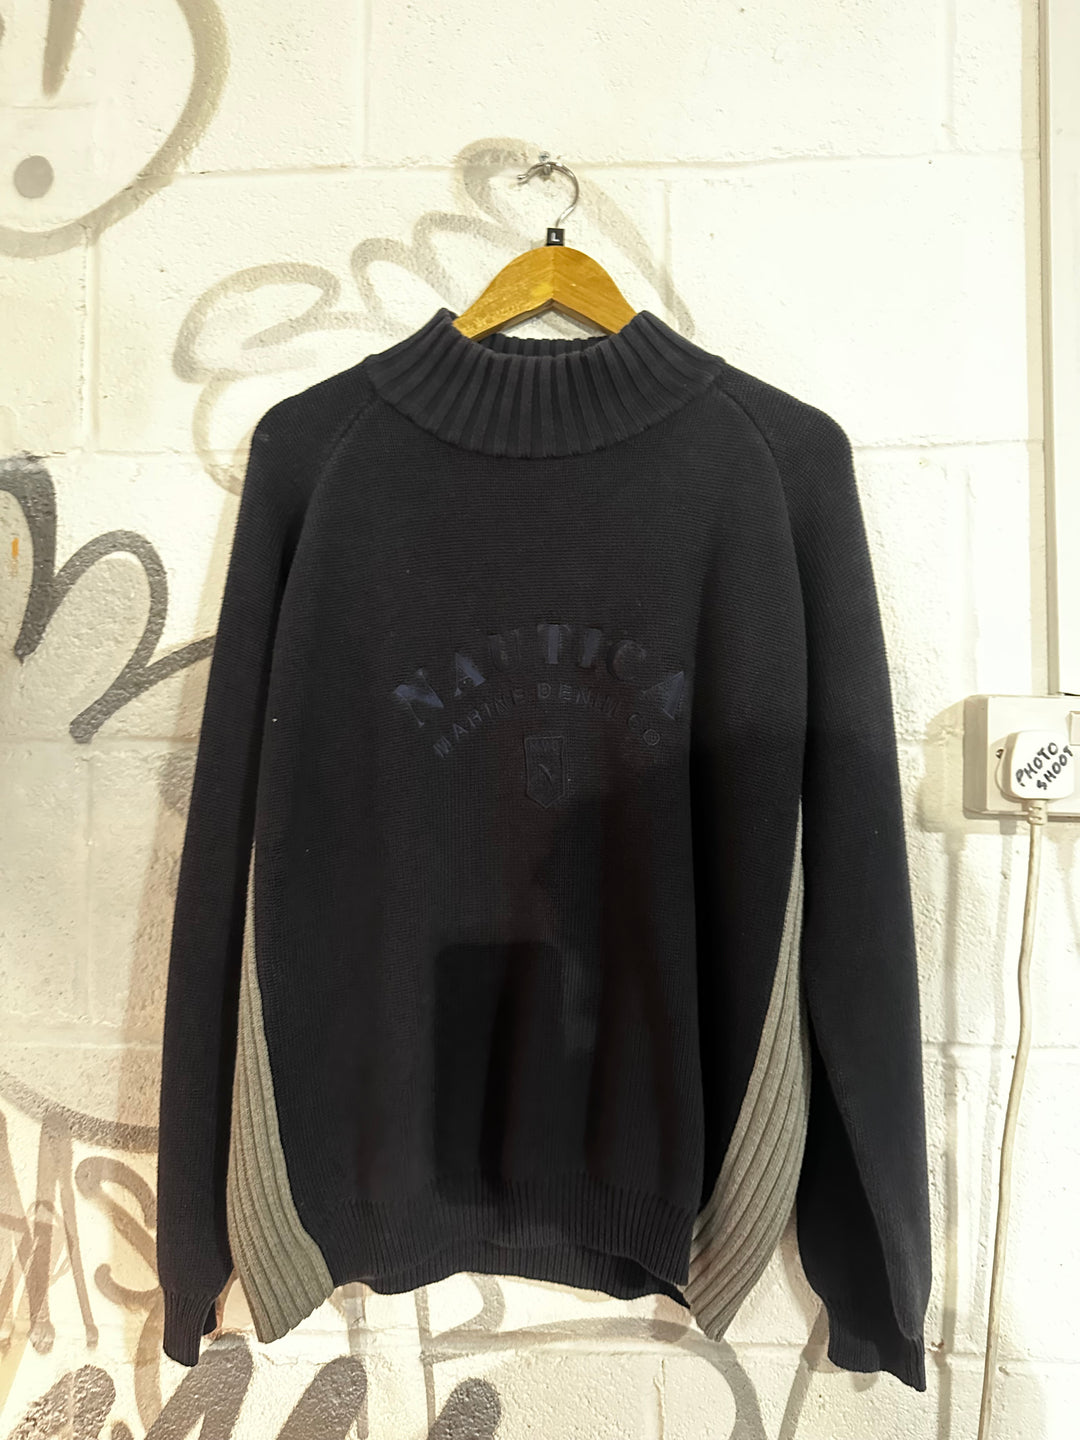 Vintage Nautica Spell Out Sweater (L)